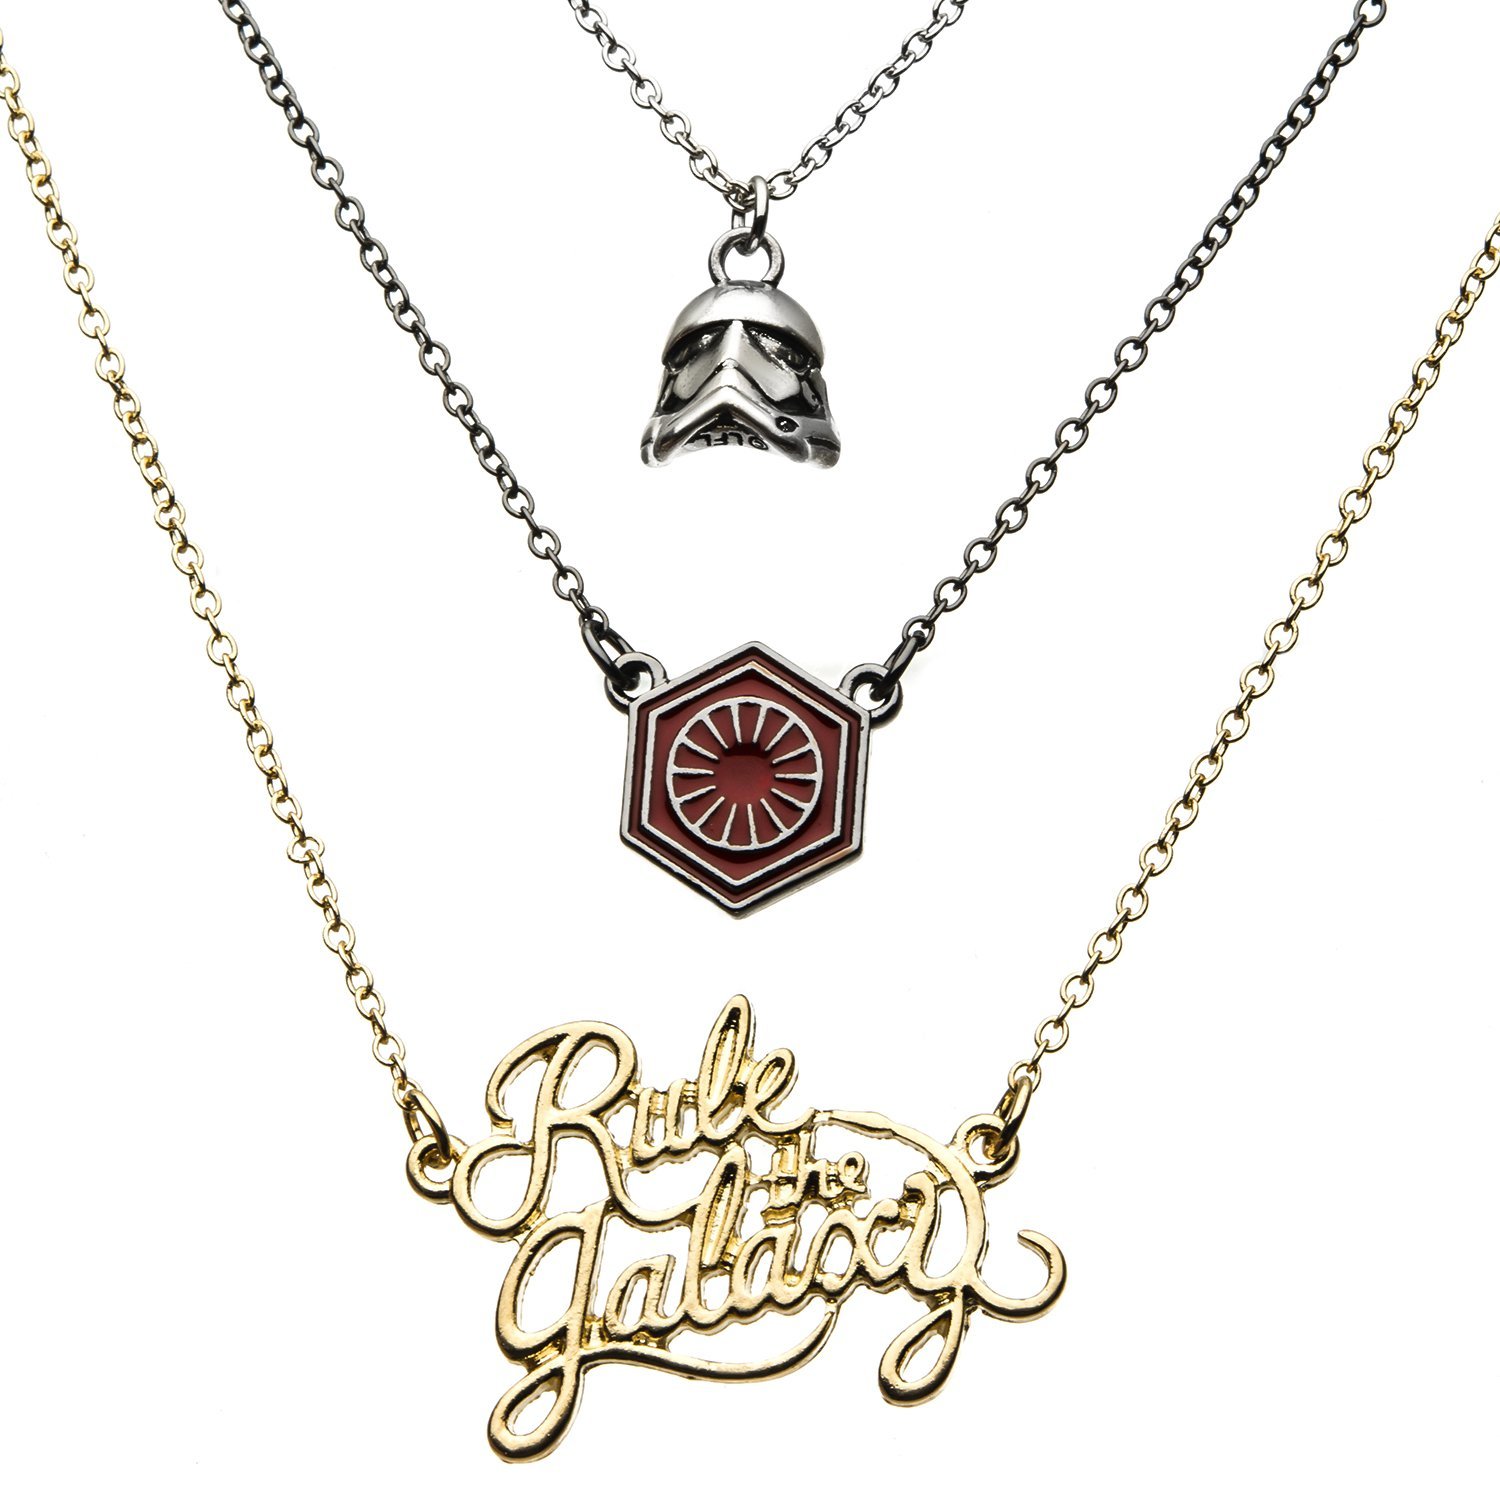 Star Wars First Order Rule The Galaxy Tiered Necklace on Amazon